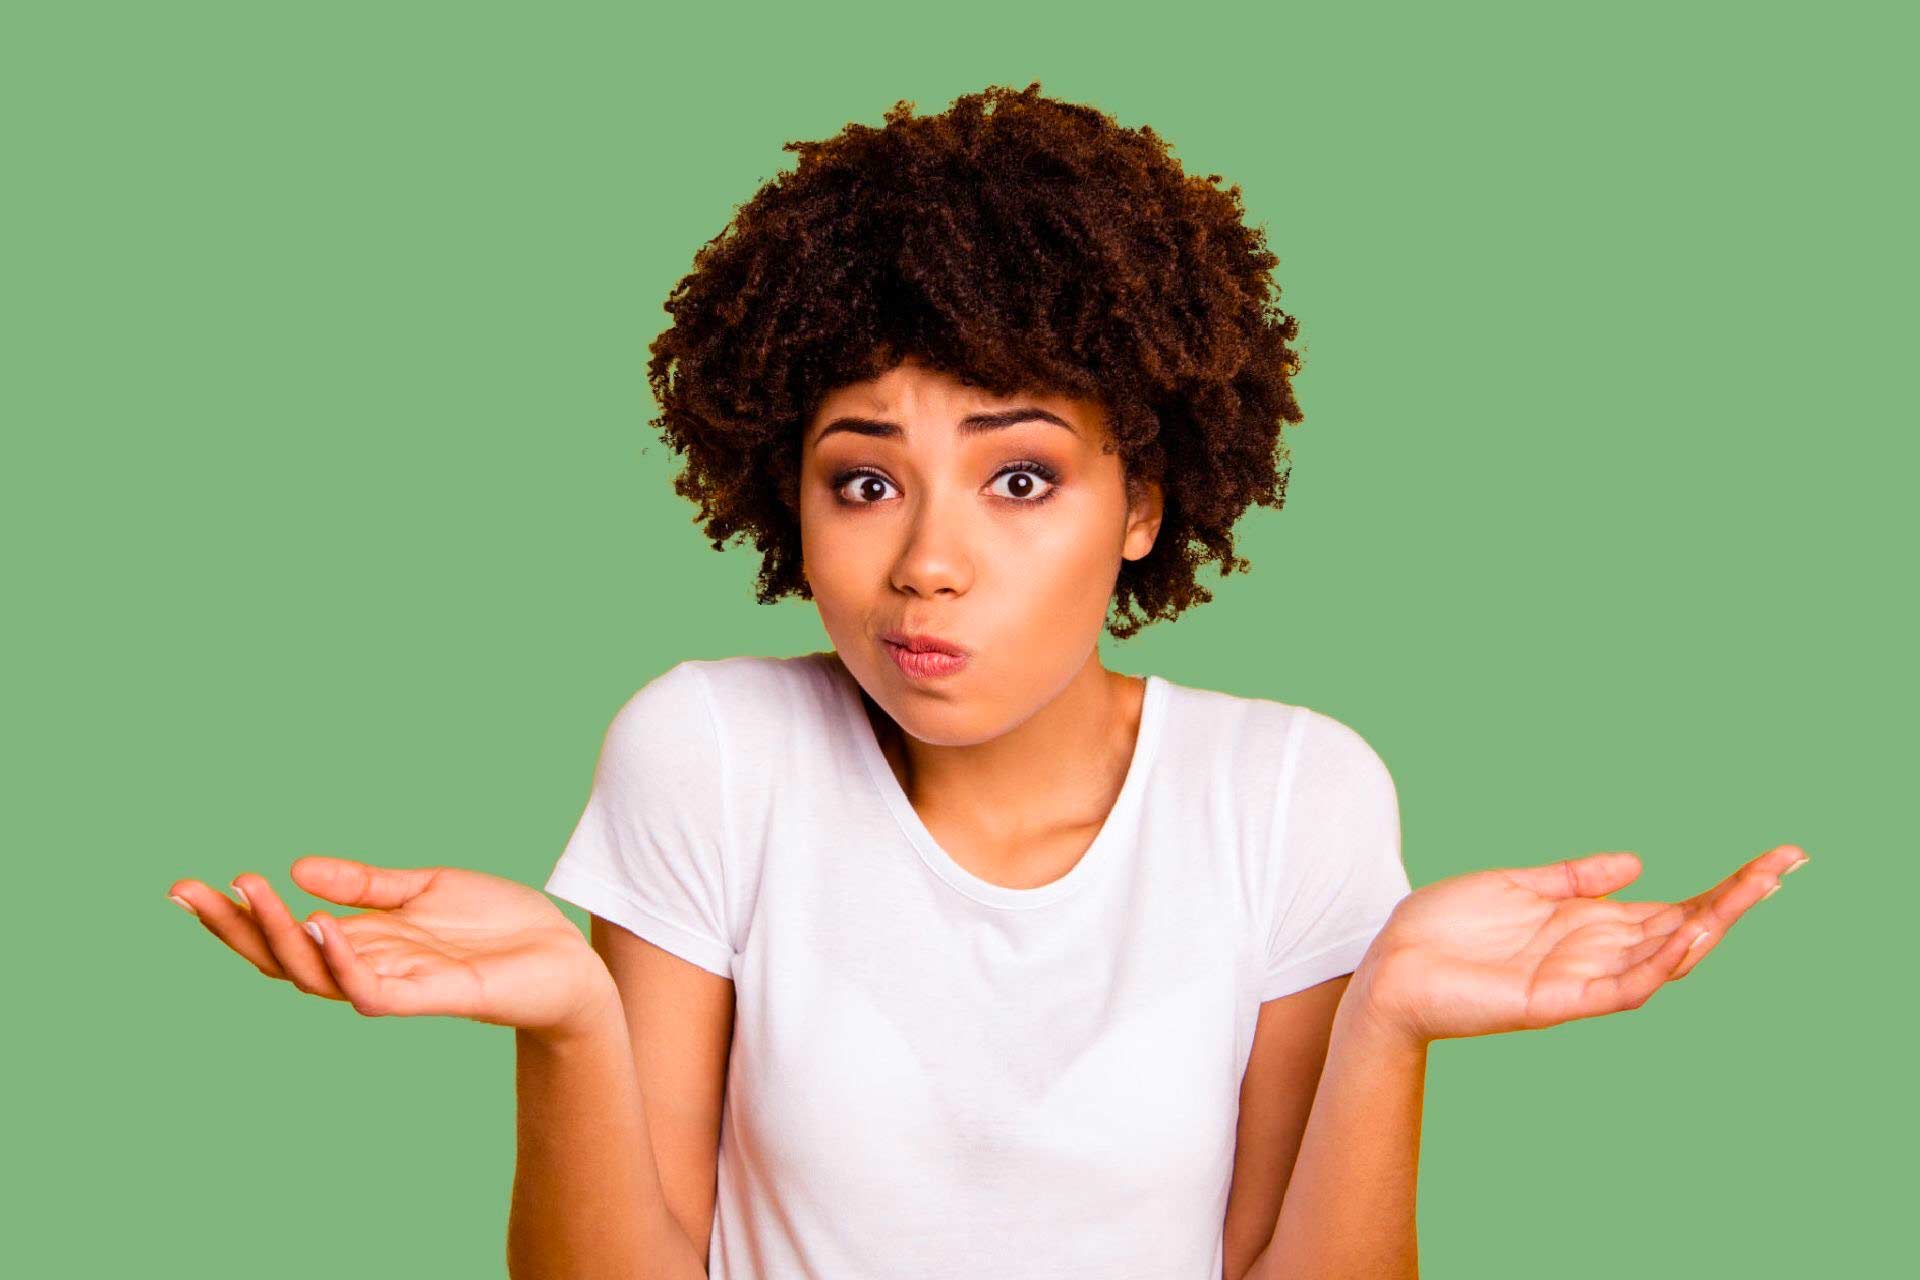 Young Black woman with questioning face shrugging, unsure which cannabis product to buy.